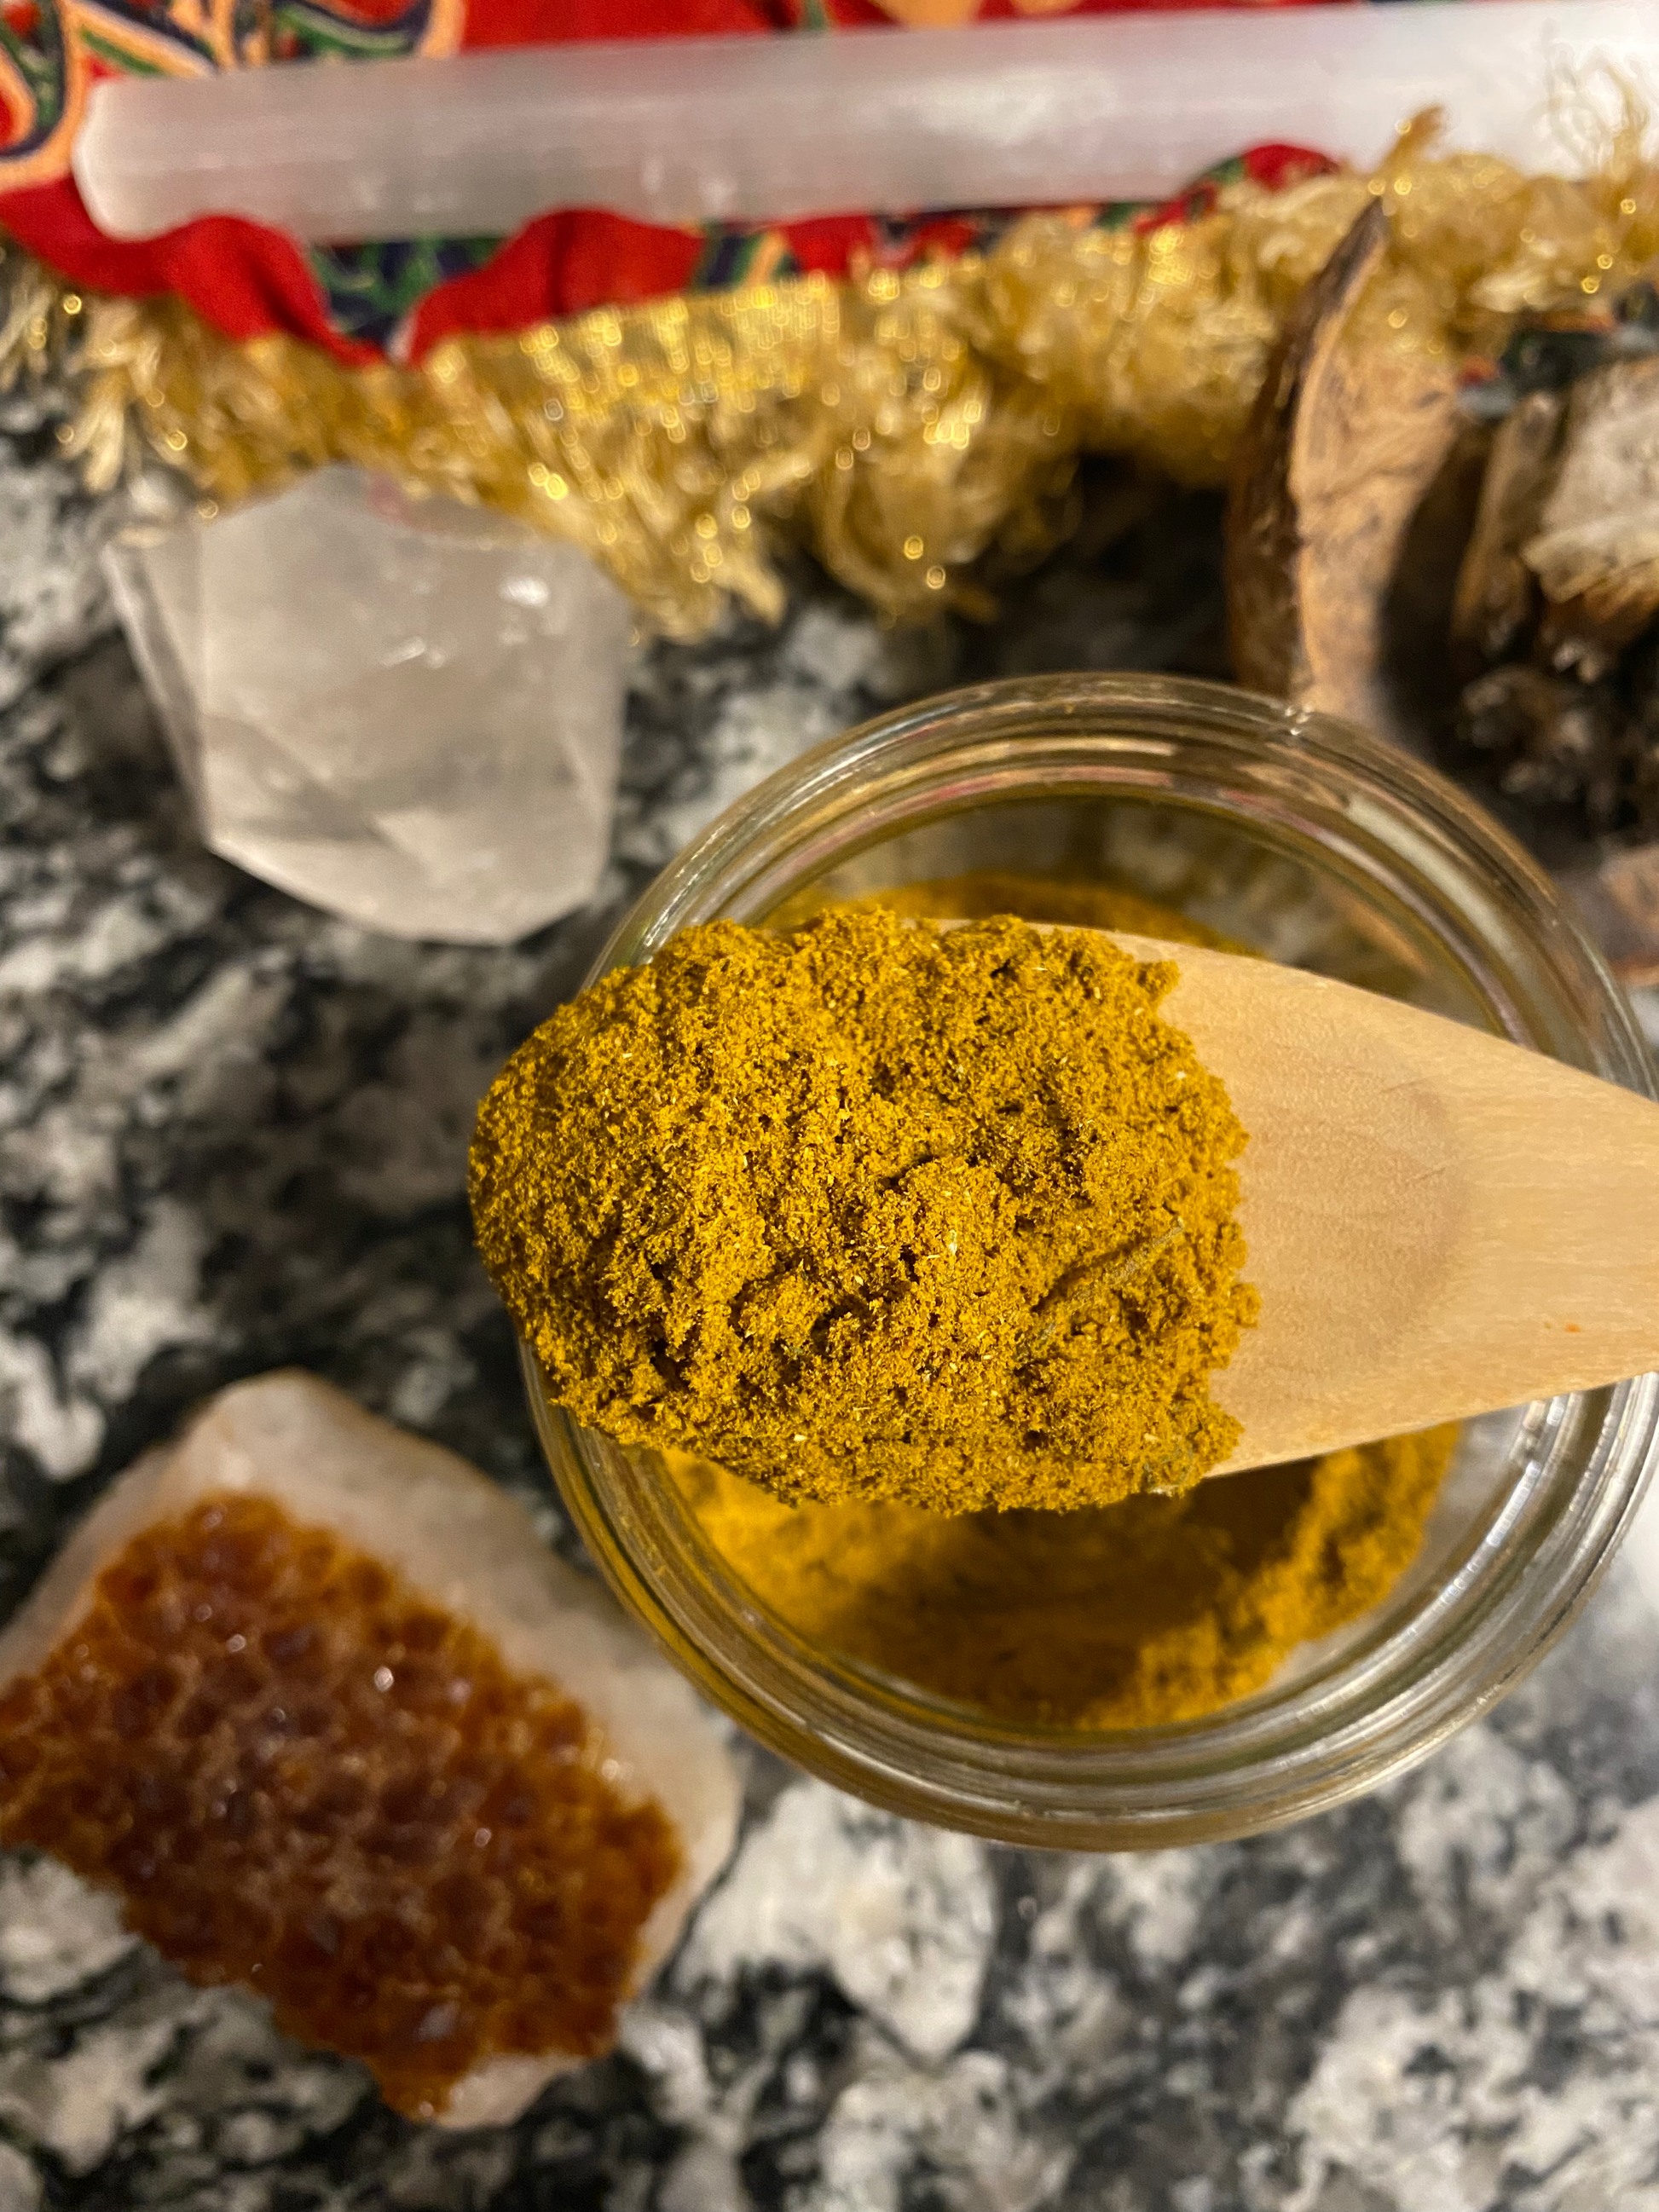 a seasoning and spice blend that is an orange-yellow color, in a glass bottle, with crystals all around the bottle.